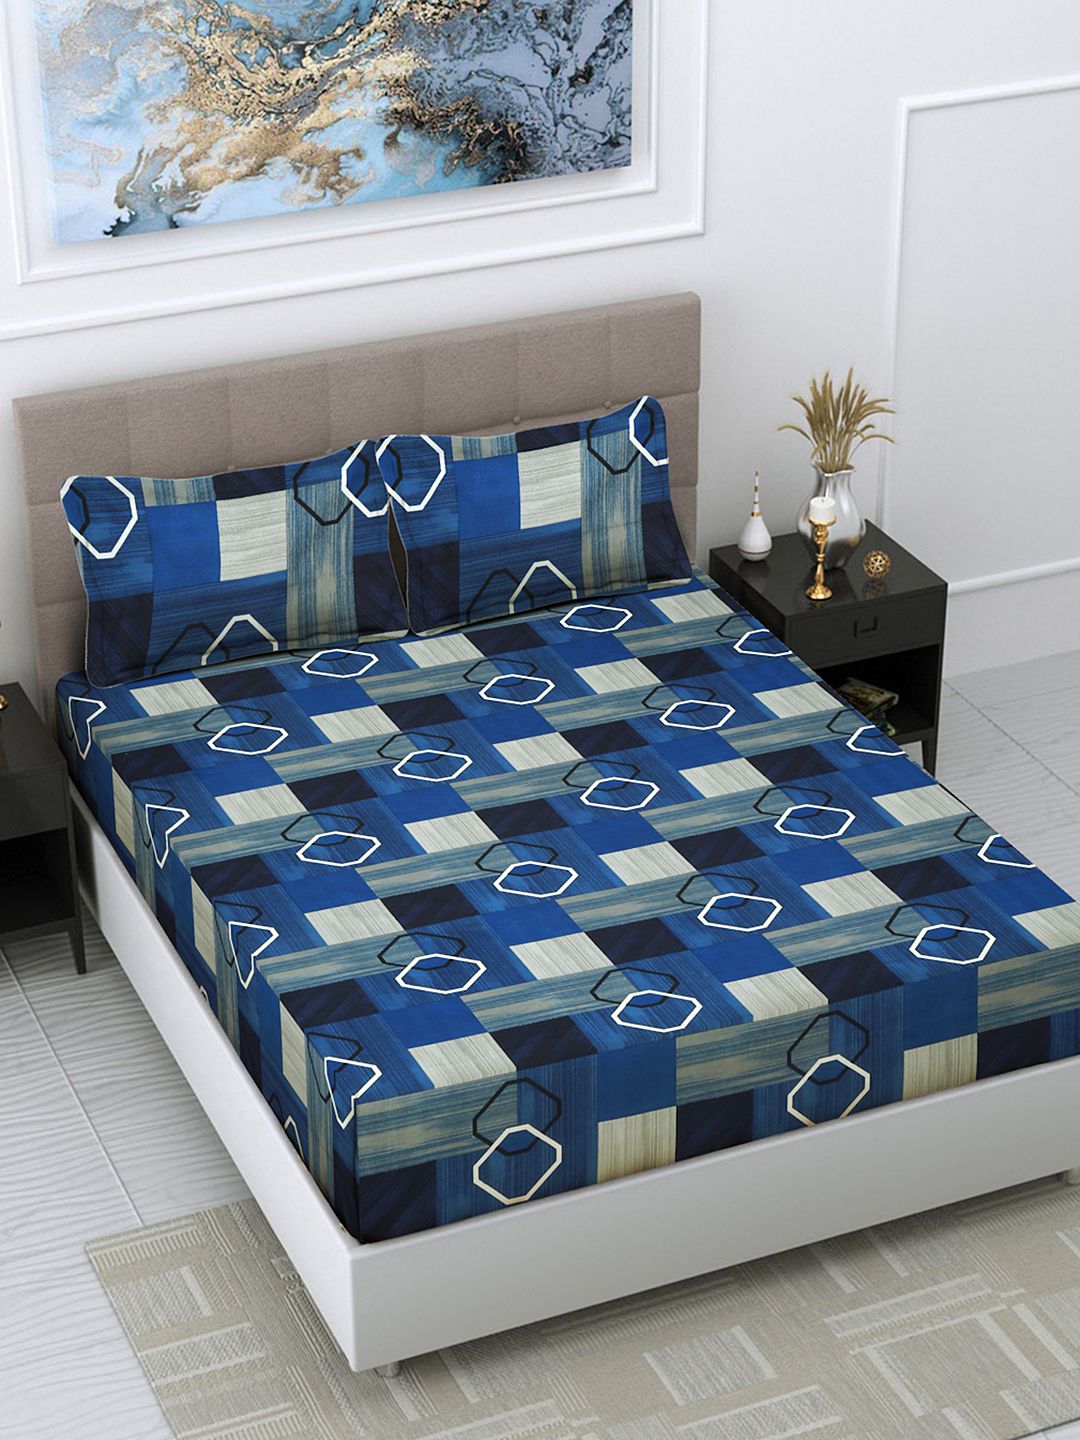     			FABINALIV Poly Cotton Geometric 1 Double King Size Bedsheet with 2 Pillow Covers - Dark Blue